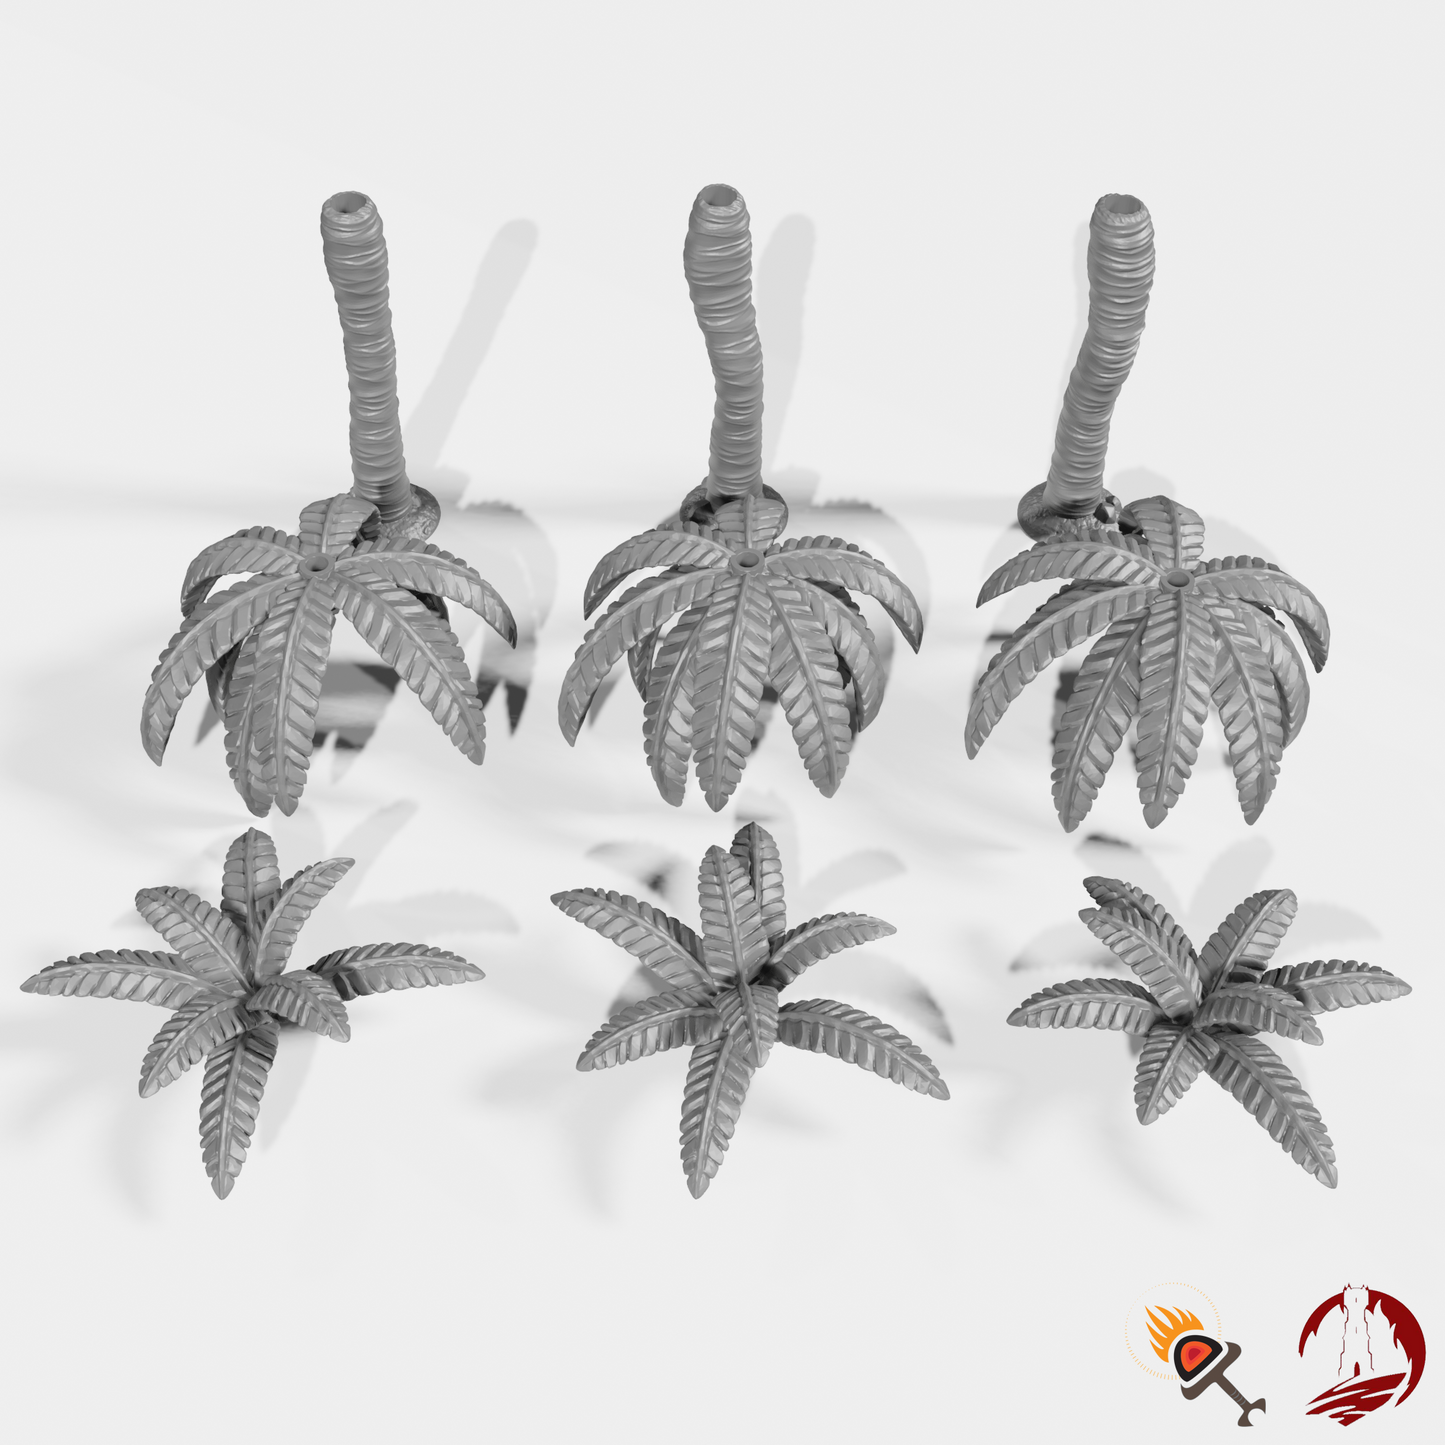 Miniature Palm Trees 15mm 28mm 32mm for D&D Terrain, DnD Pirate Cove, Pathfinder Coastal Tribal, Tropical Island Diorama, Blood and Plunder